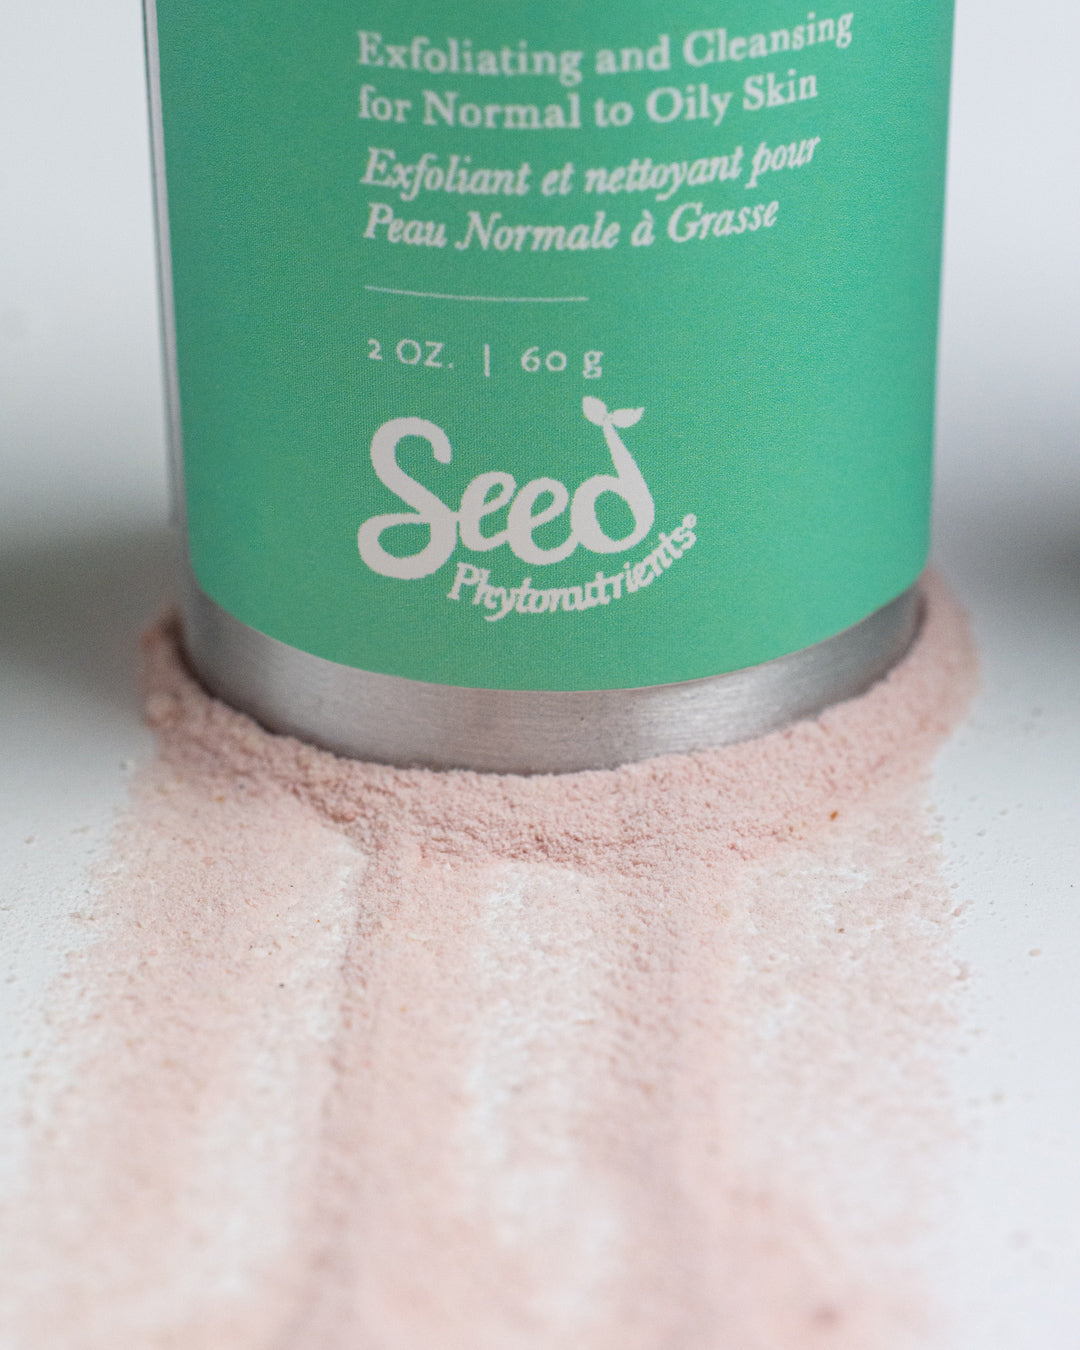 Seed Phytonutrients Purifying Facial Cleansing Powder